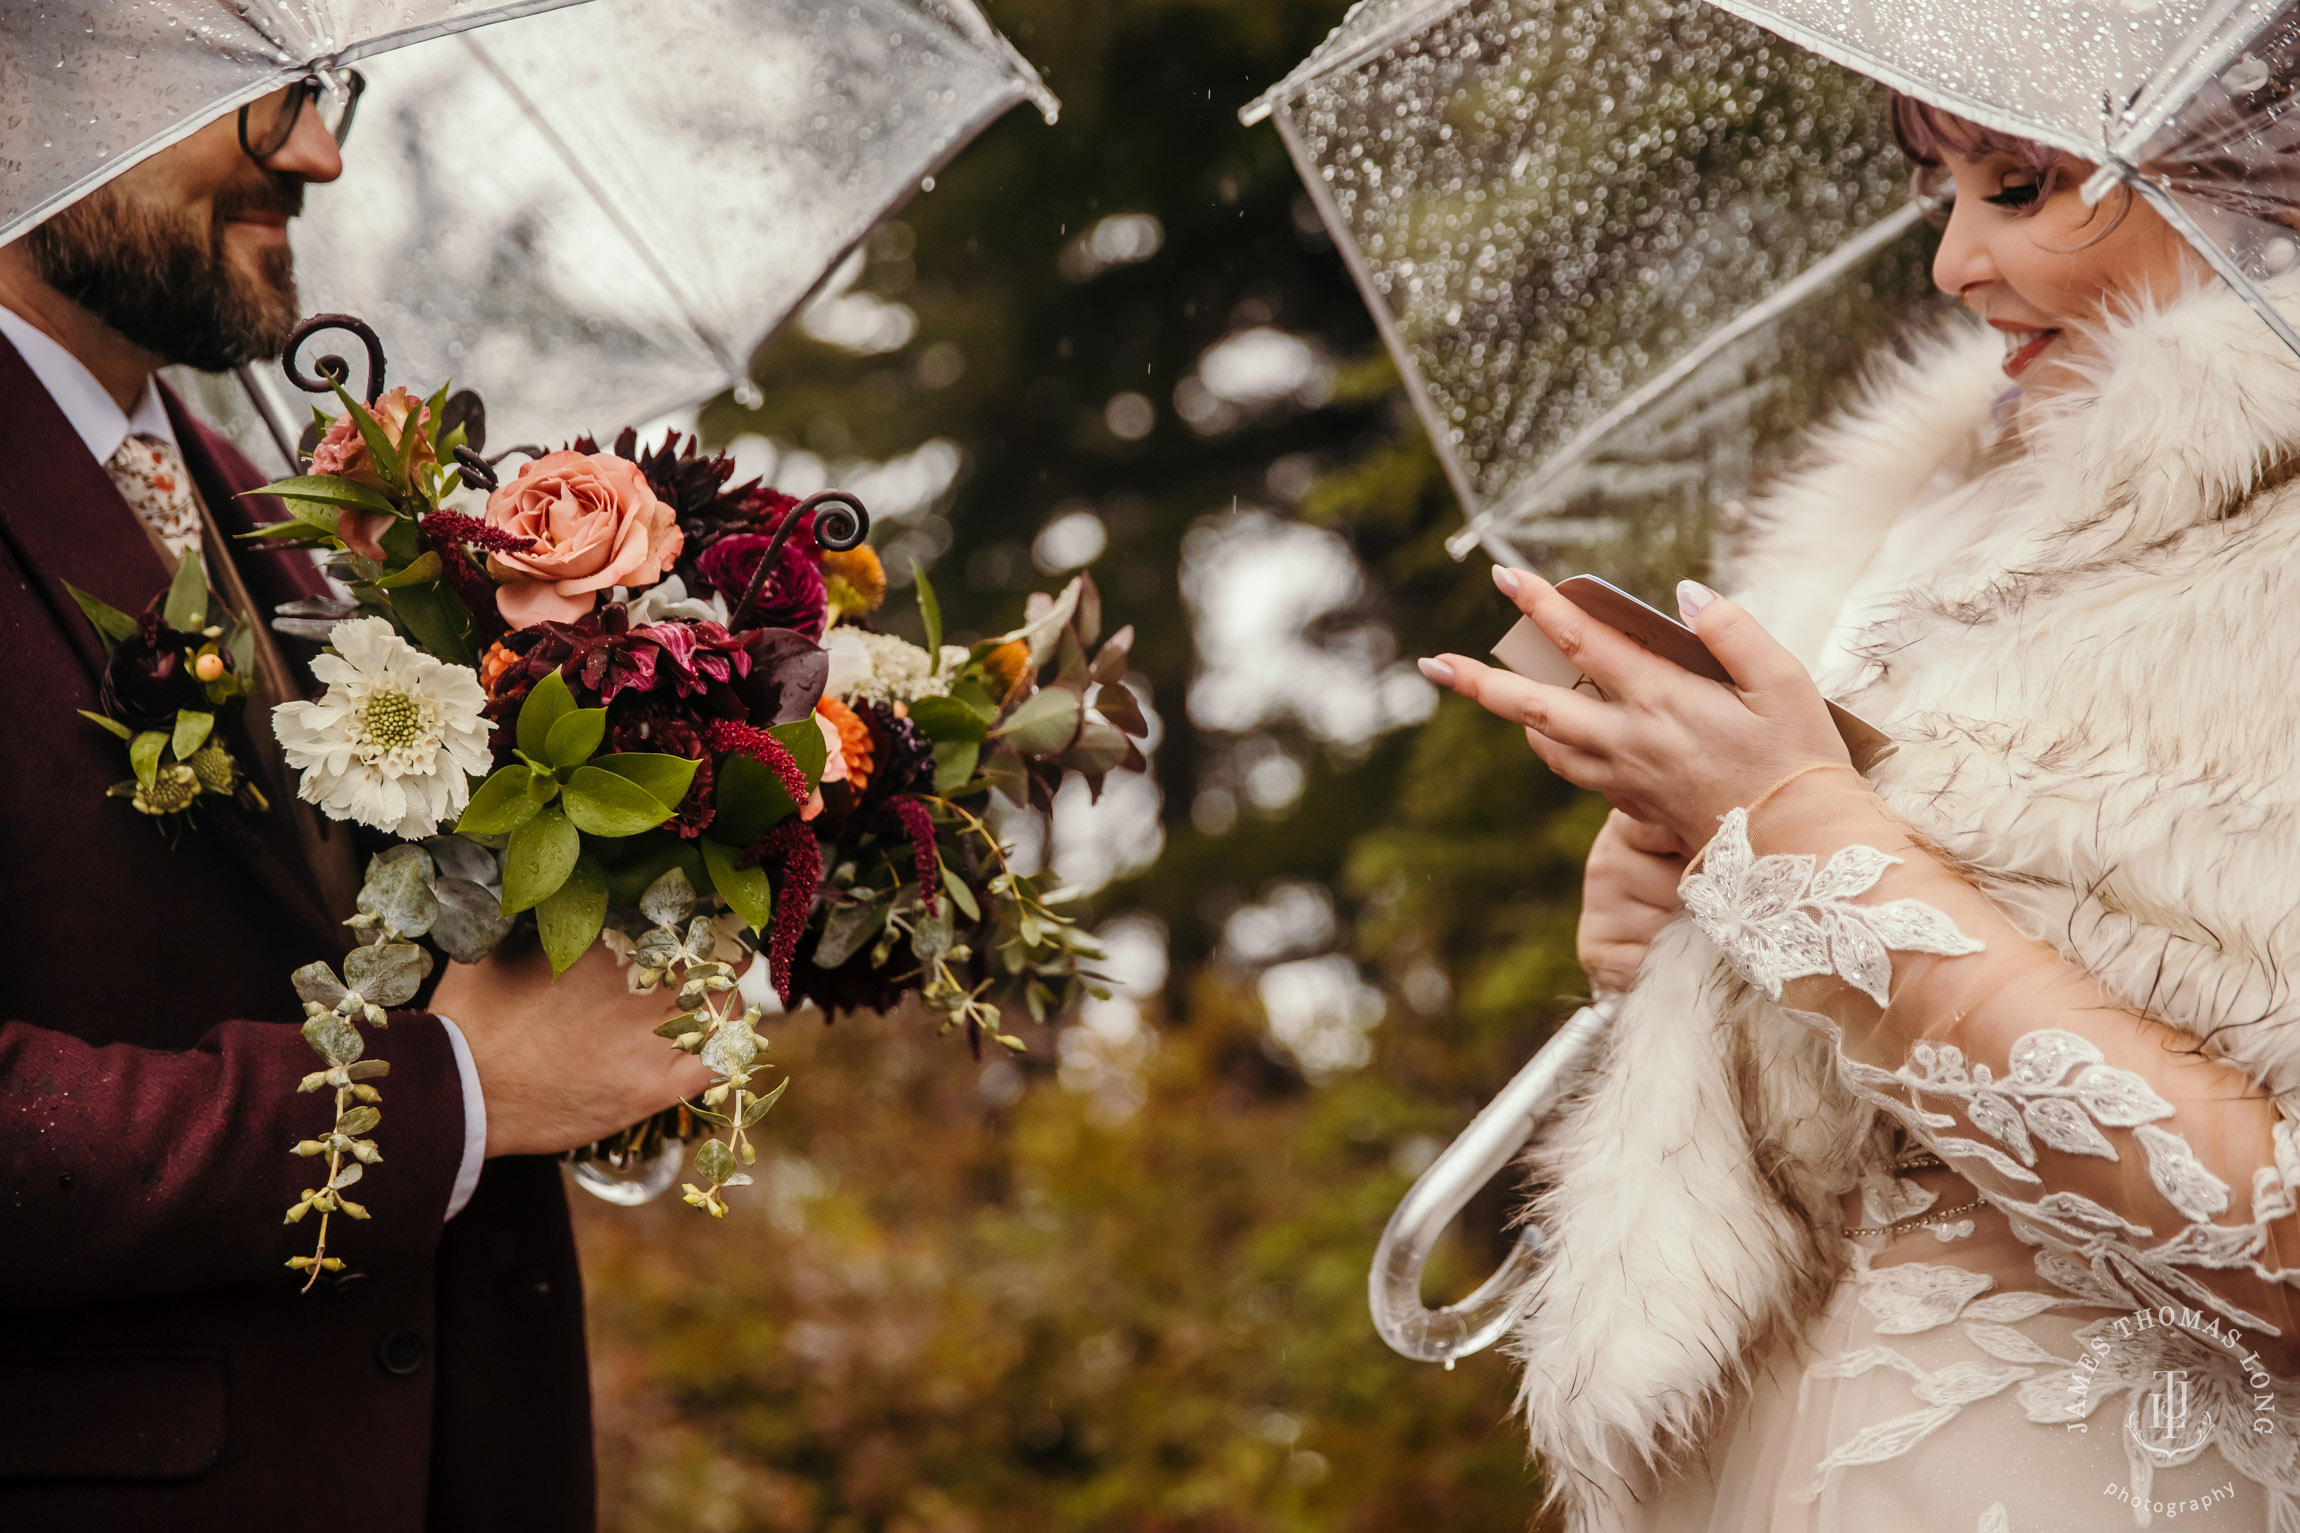 North Cascades adventure elopement in the rain by Seattle adventure elopement photographer James Thomas Long Photography